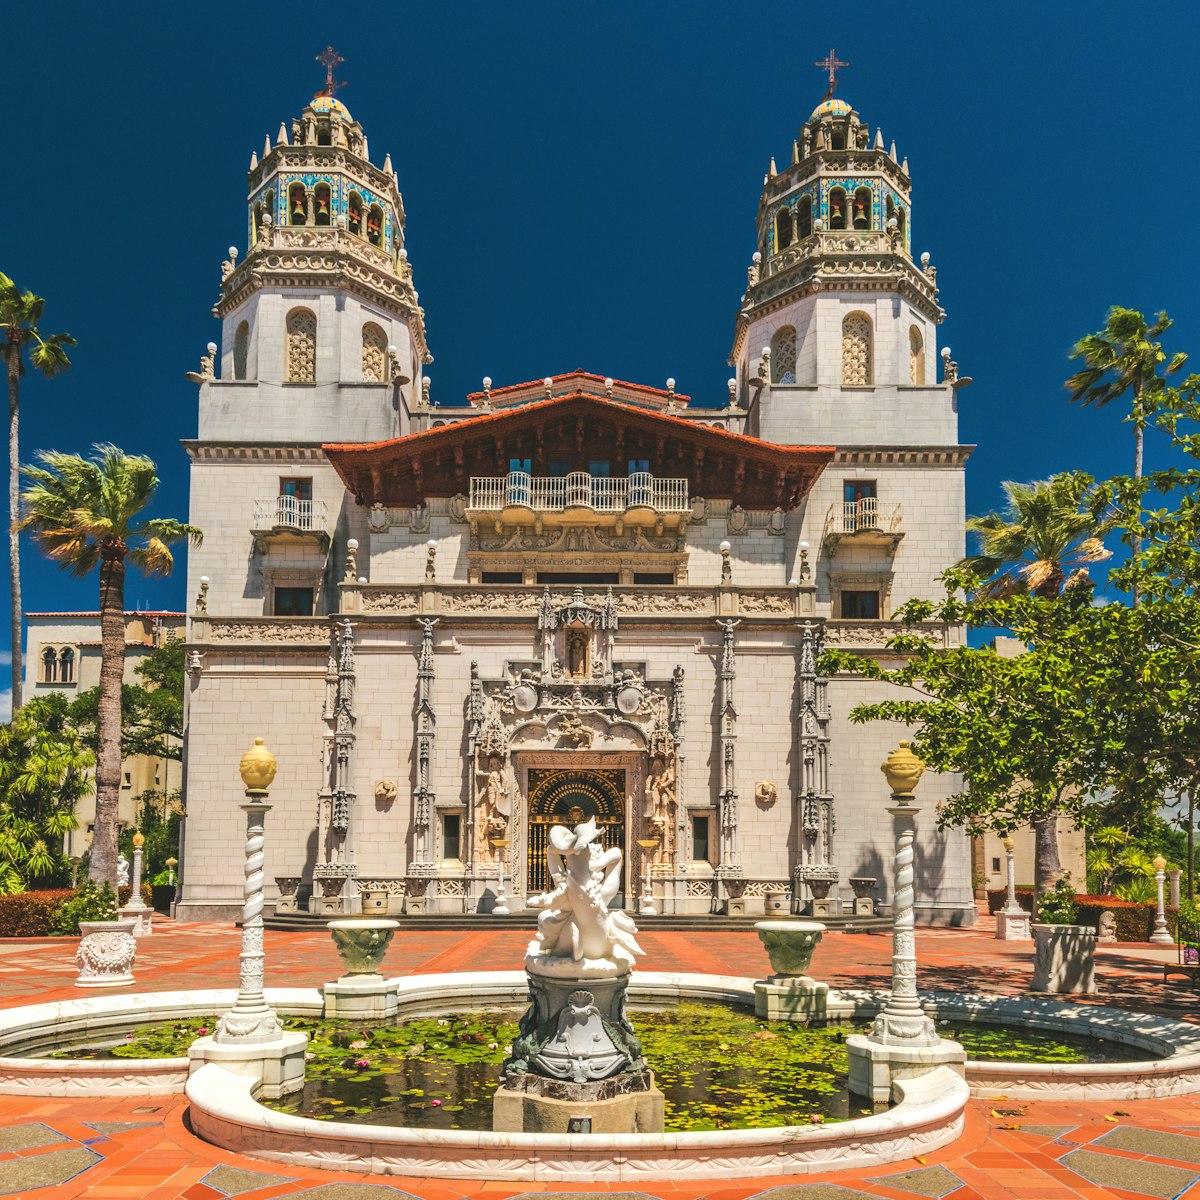 San Simeon, California / USA - May 12, 2018: Exterior view of Hearst Castle, William Randolph Hearst's extravagant coastal hilltop estate designed by architect Julia Morgan over 28 years.; Shutterstock ID 1297759909; your: Meghan O'Dea; gl: 65050; netsuite: Online Editorial; full: POI